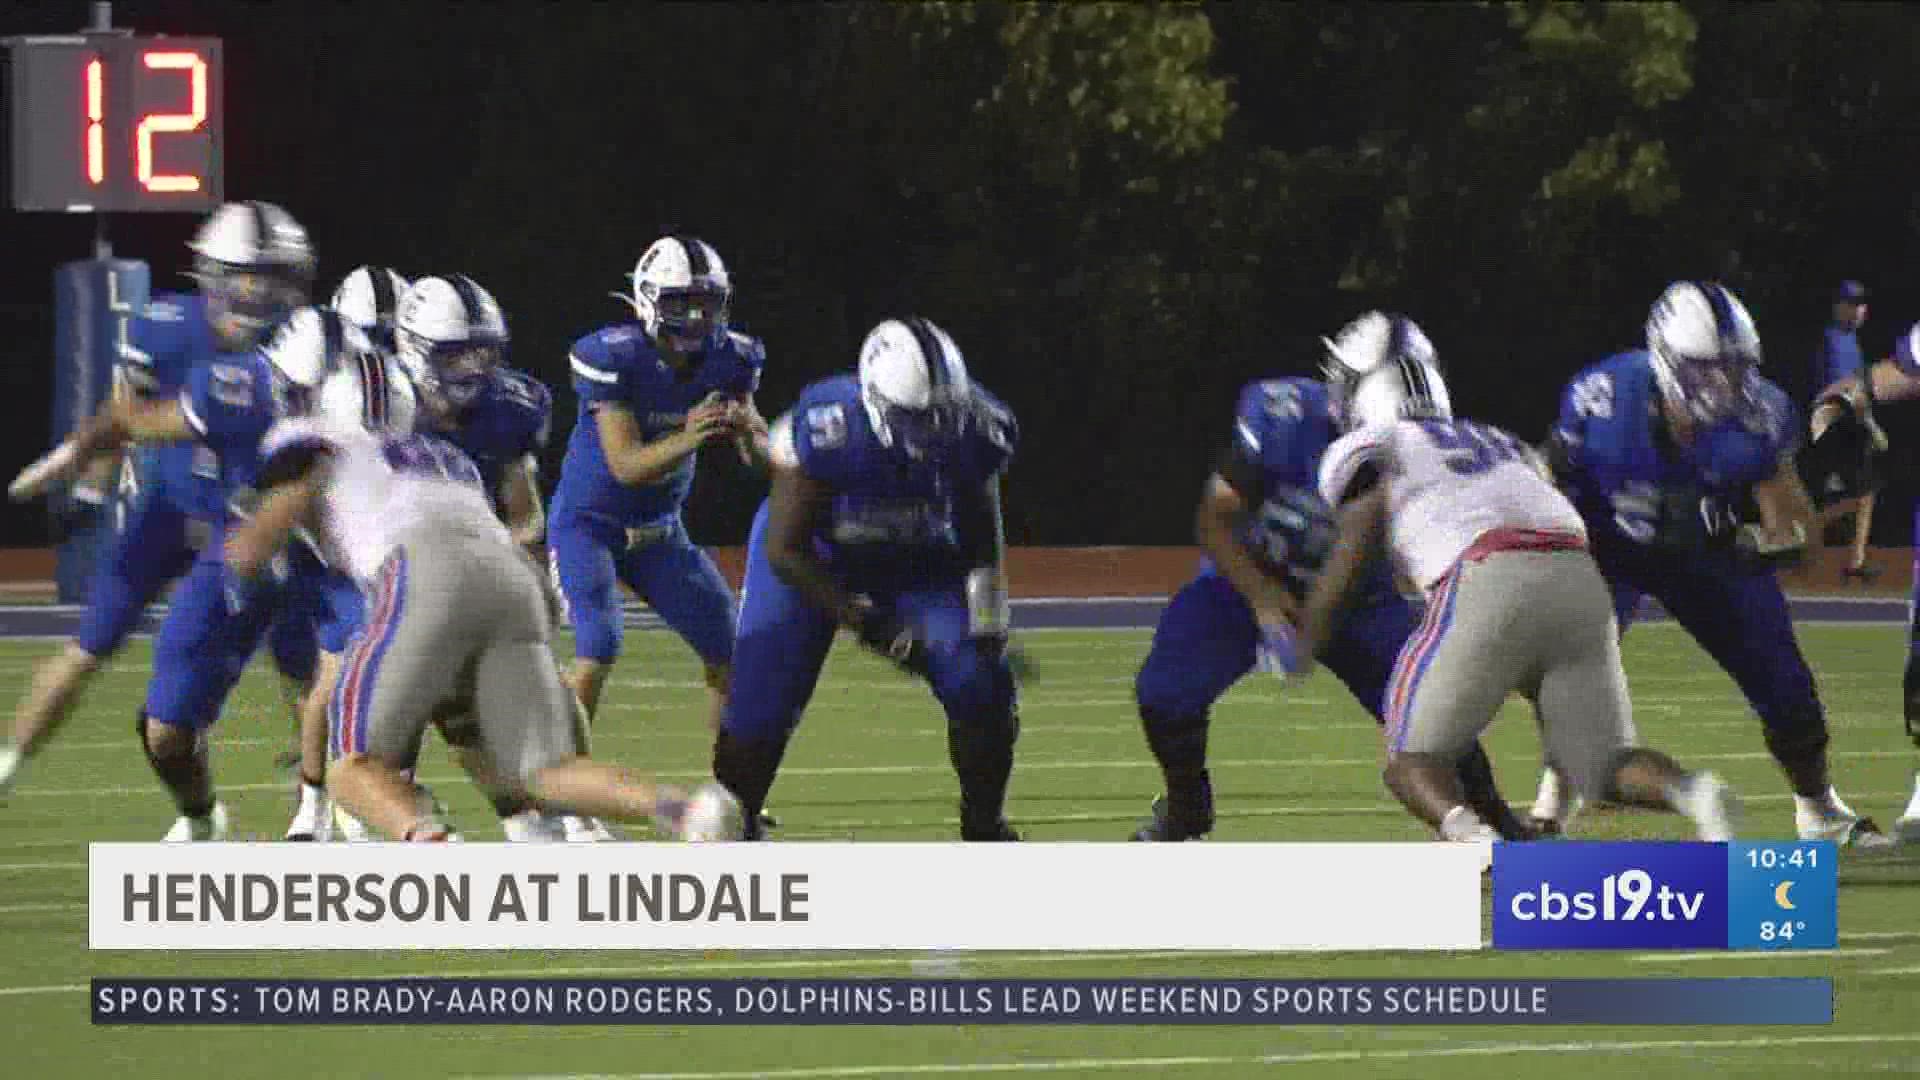 For all the best high school football highlights, check out Under the Lights at 10PM on CBS19!